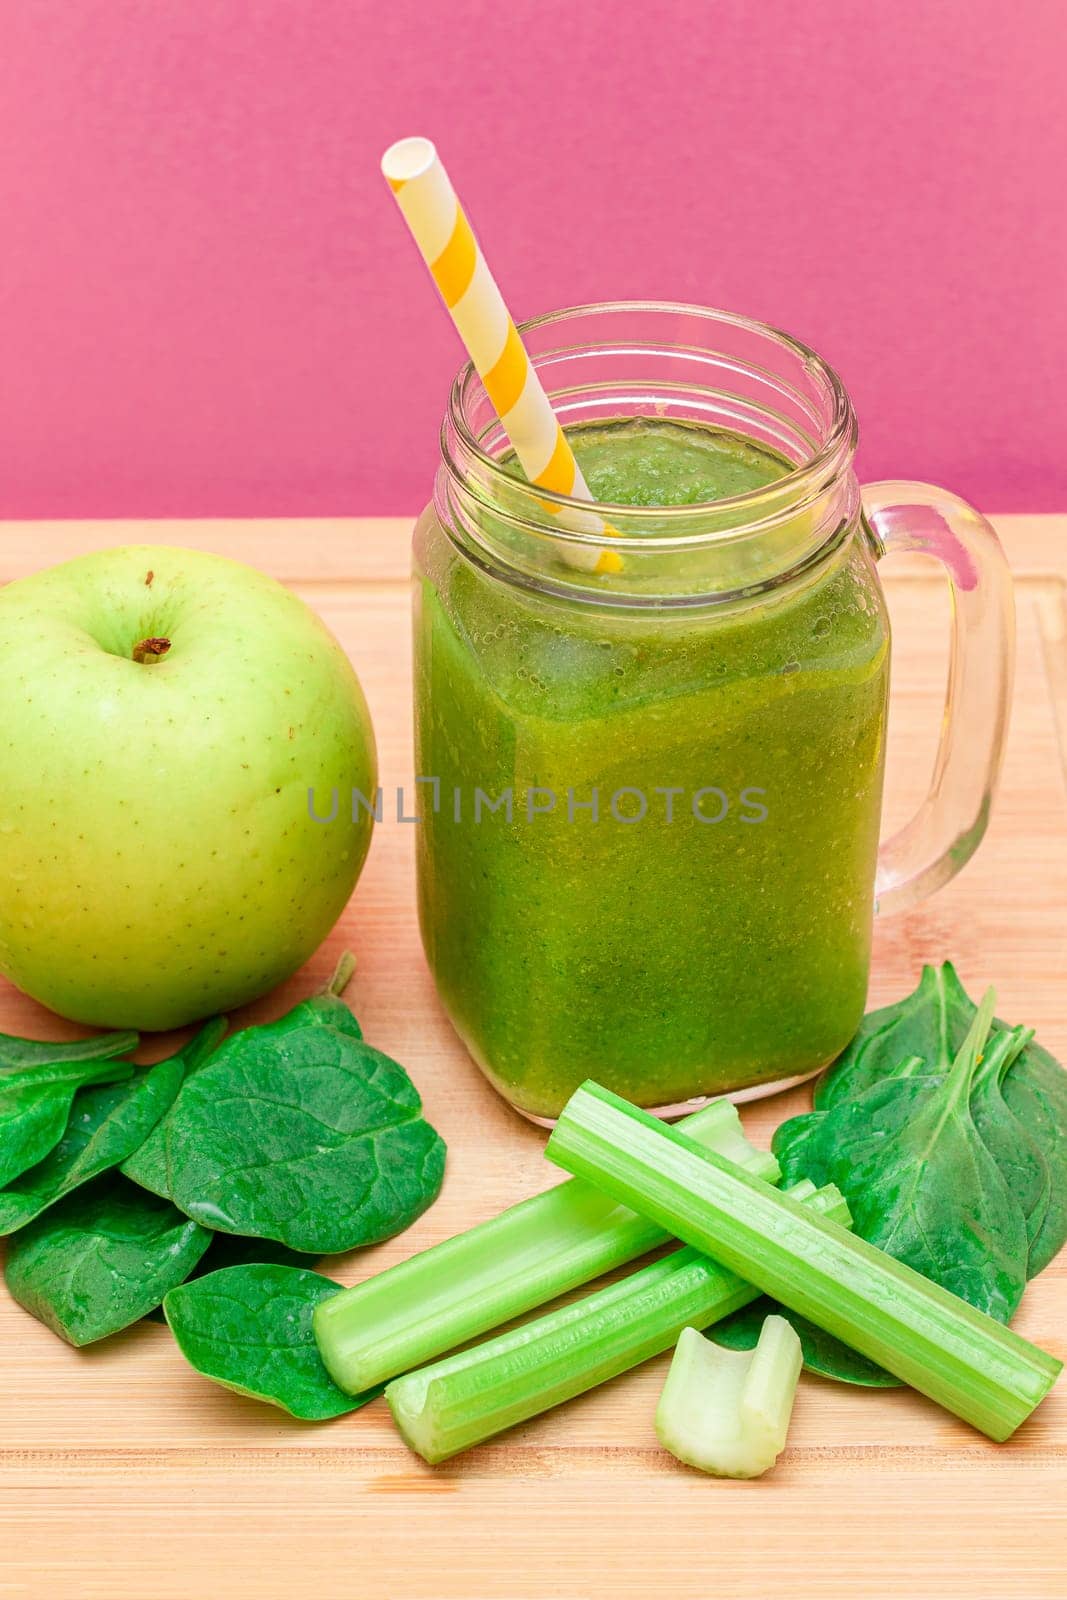 Fresh Green Smoothie of Apple, Celery, and Spinach in Glass Smoothie Jar with Yellow Cocktail Straw on Wooden Cutting Board. Vegan Detox Drink. Vegetarian Culture. Healthy Eating and Fruit Diet